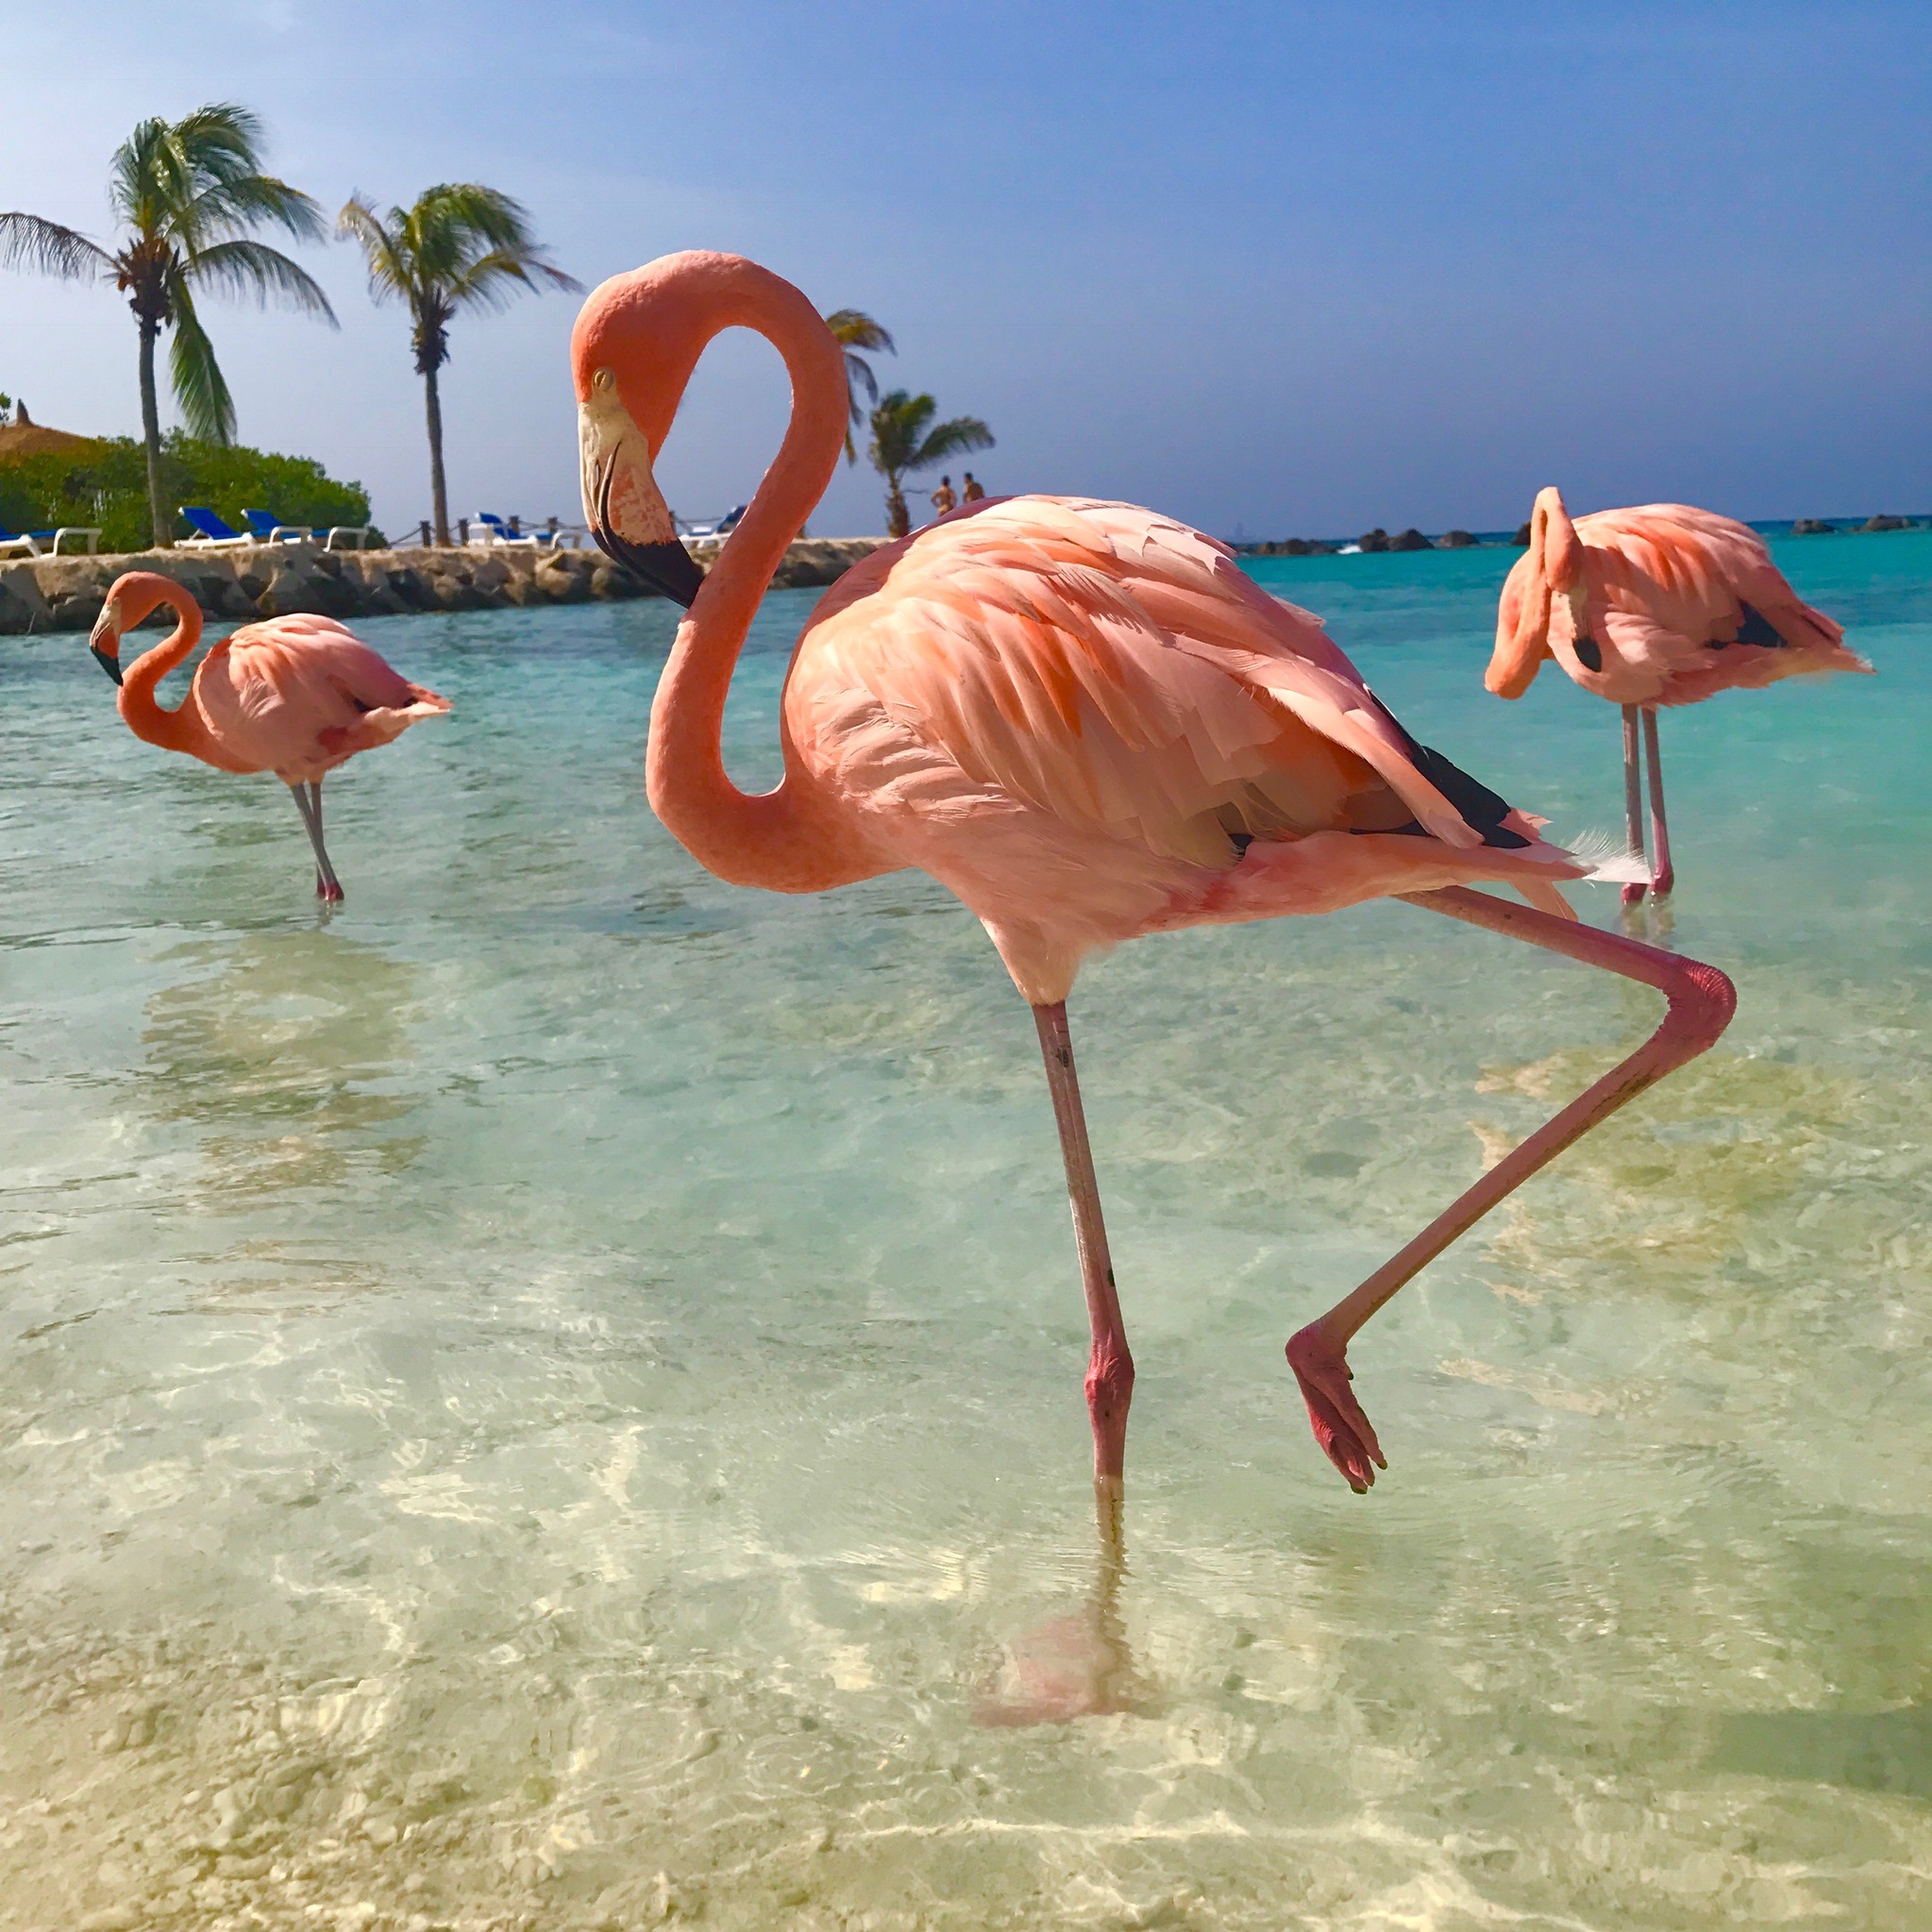 There's a small island in the Caribbean where you can frolic with ...